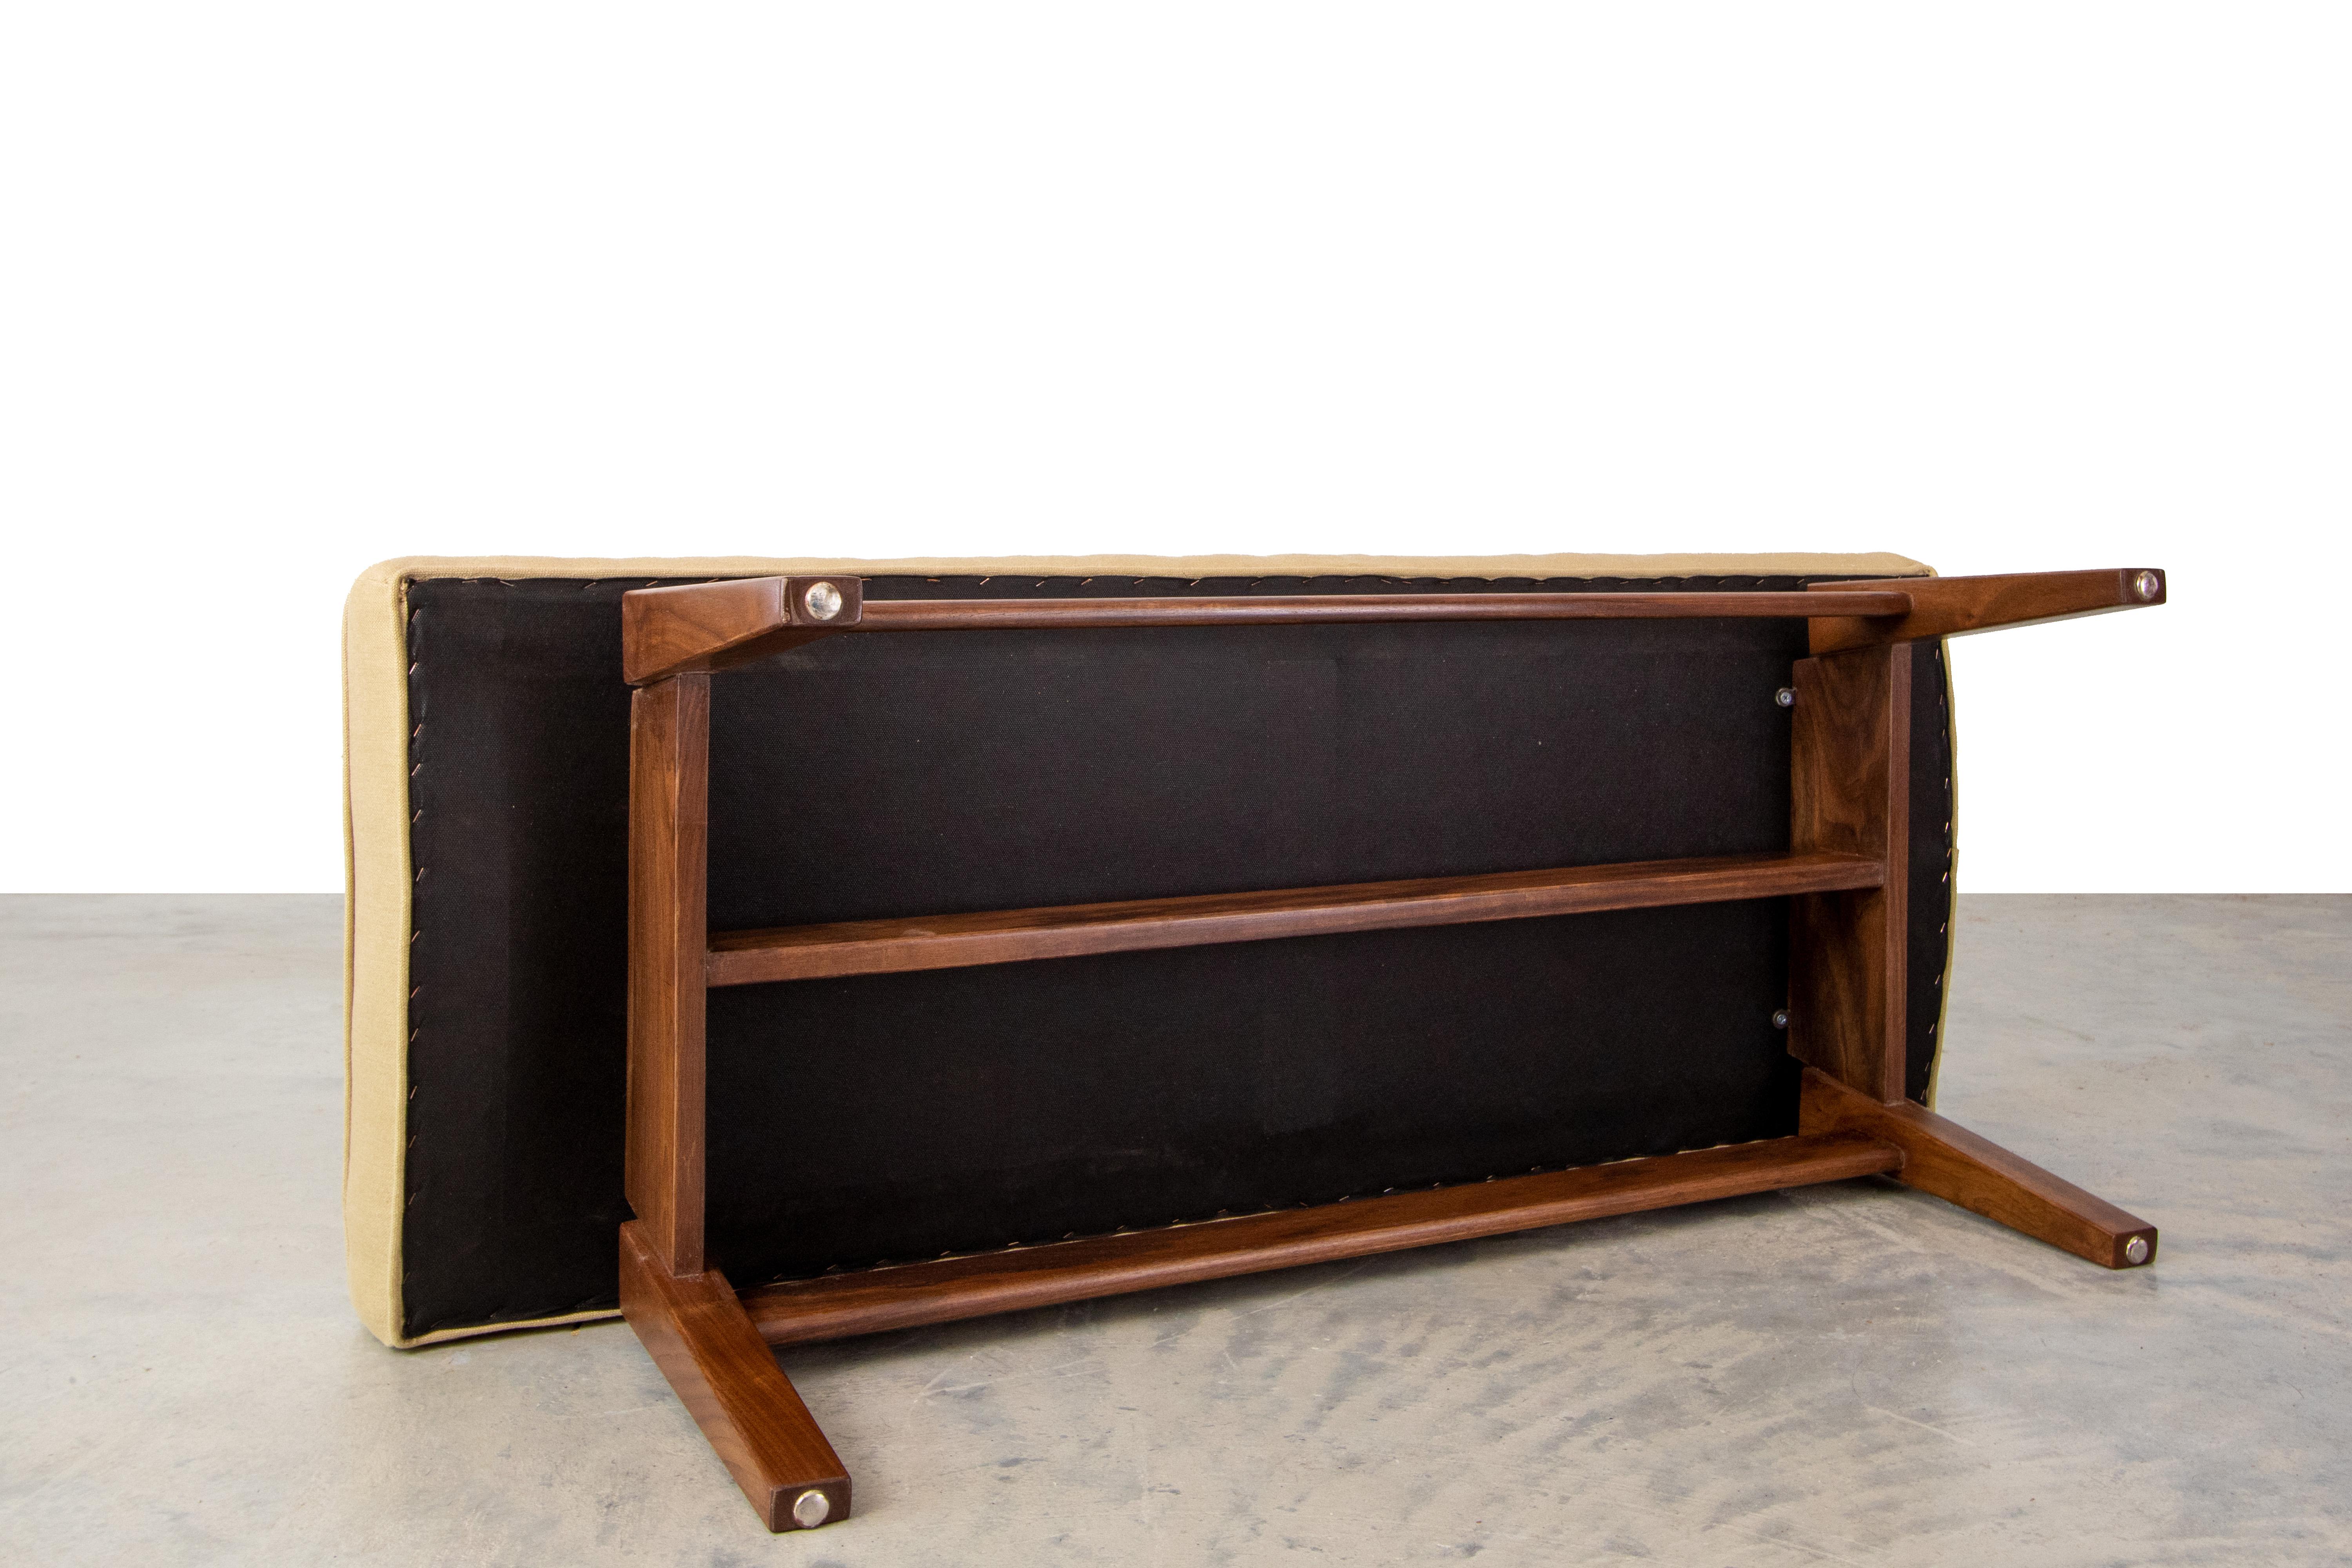 American Mid century modern Jens Risom 4' floating bench in walnut and linen fabric